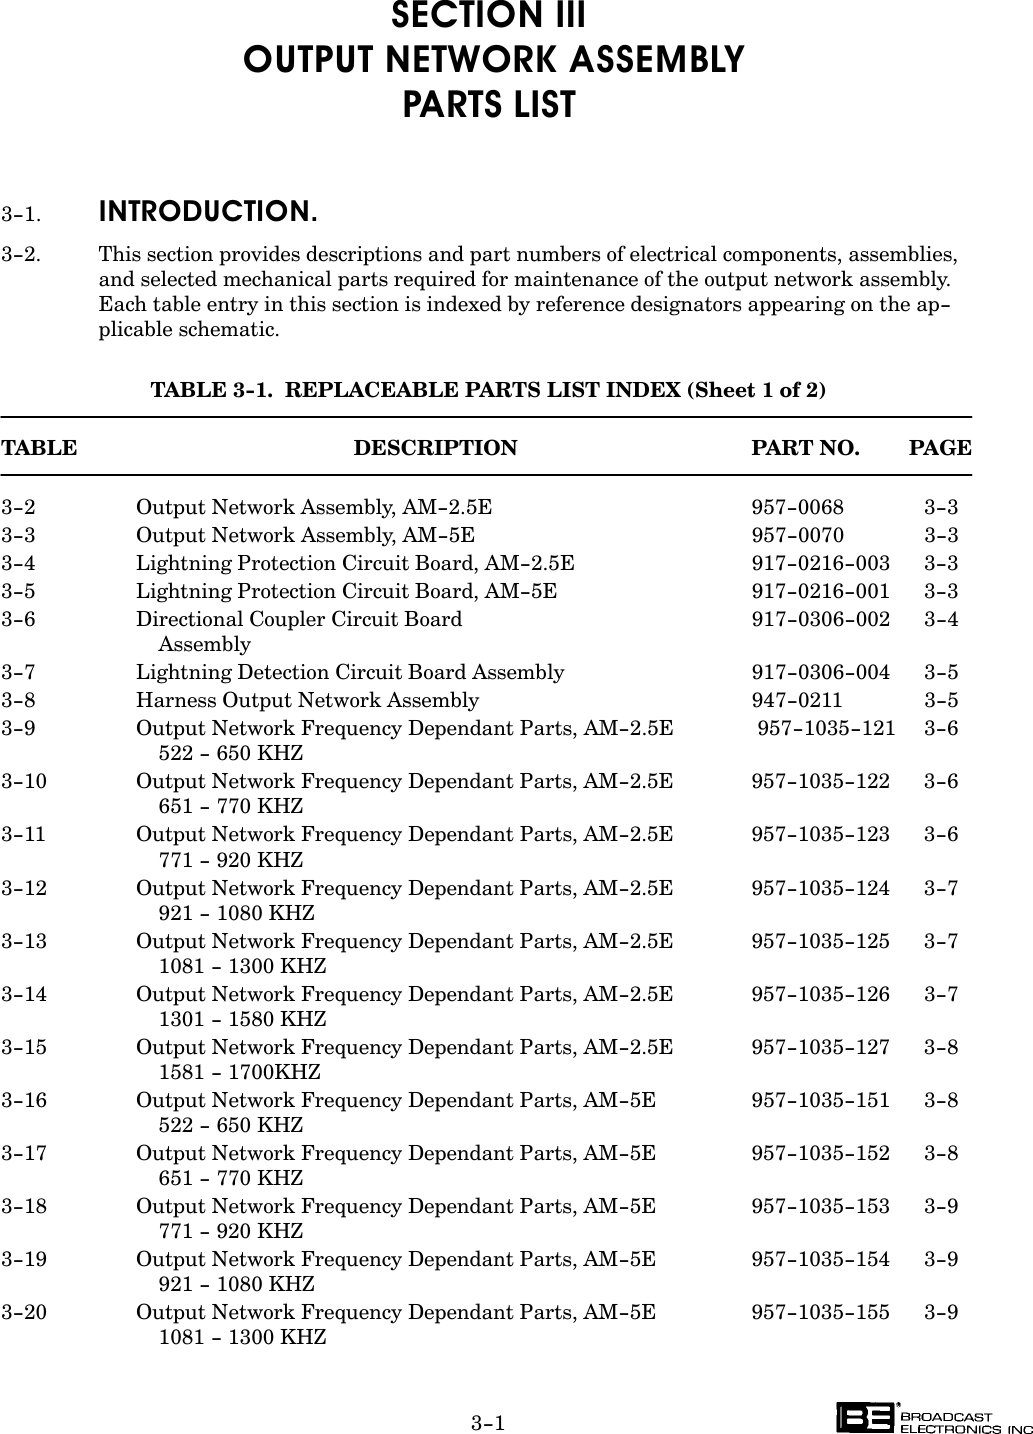 3-1SECTION III OUTPUT NETWORK ASSEMBLYPARTS LIST3-1. INTRODUCTION.3-2. This section provides descriptions and part numbers of electrical components, assemblies,and selected mechanical parts required for maintenance of the output network assembly.Each table entry in this section is indexed by reference designators appearing on the ap-plicable schematic.TABLE 3-1.  REPLACEABLE PARTS LIST INDEX (Sheet 1 of 2)TABLE DESCRIPTION PART NO. PAGE3-2 Output Network Assembly, AM-2.5E 957-0068 3-33-3 Output Network Assembly, AM-5E 957-0070 3-33-4 Lightning Protection Circuit Board, AM-2.5E 917-0216-003 3-33-5 Lightning Protection Circuit Board, AM-5E 917-0216-001 3-33-6 Directional Coupler Circuit Board  917-0306-002 3-4Assembly3-7 Lightning Detection Circuit Board Assembly   917-0306-004 3-53-8 Harness Output Network Assembly 947-0211 3-53-9 Output Network Frequency Dependant Parts, AM-2.5E   957-1035-121 3-6522 - 650 KHZ3-10 Output Network Frequency Dependant Parts, AM-2.5E    957-1035-122 3-6651 - 770 KHZ3-11 Output Network Frequency Dependant Parts, AM-2.5E    957-1035-123 3-6771 - 920 KHZ3-12 Output Network Frequency Dependant Parts, AM-2.5E   957-1035-124 3-7921 - 1080 KHZ3-13 Output Network Frequency Dependant Parts, AM-2.5E   957-1035-125 3-71081 - 1300 KHZ3-14 Output Network Frequency Dependant Parts, AM-2.5E  957-1035-126 3-71301 - 1580 KHZ3-15 Output Network Frequency Dependant Parts, AM-2.5E   957-1035-127  3-81581 - 1700KHZ3-16 Output Network Frequency Dependant Parts, AM-5E  957-1035-151 3-8522 - 650 KHZ3-17 Output Network Frequency Dependant Parts, AM-5E    957-1035-152 3-8651 - 770 KHZ3-18 Output Network Frequency Dependant Parts, AM-5E    957-1035-153 3-9771 - 920 KHZ3-19 Output Network Frequency Dependant Parts, AM-5E   957-1035-154 3-9921 - 1080 KHZ3-20 Output Network Frequency Dependant Parts, AM-5E   957-1035-155 3-91081 - 1300 KHZ